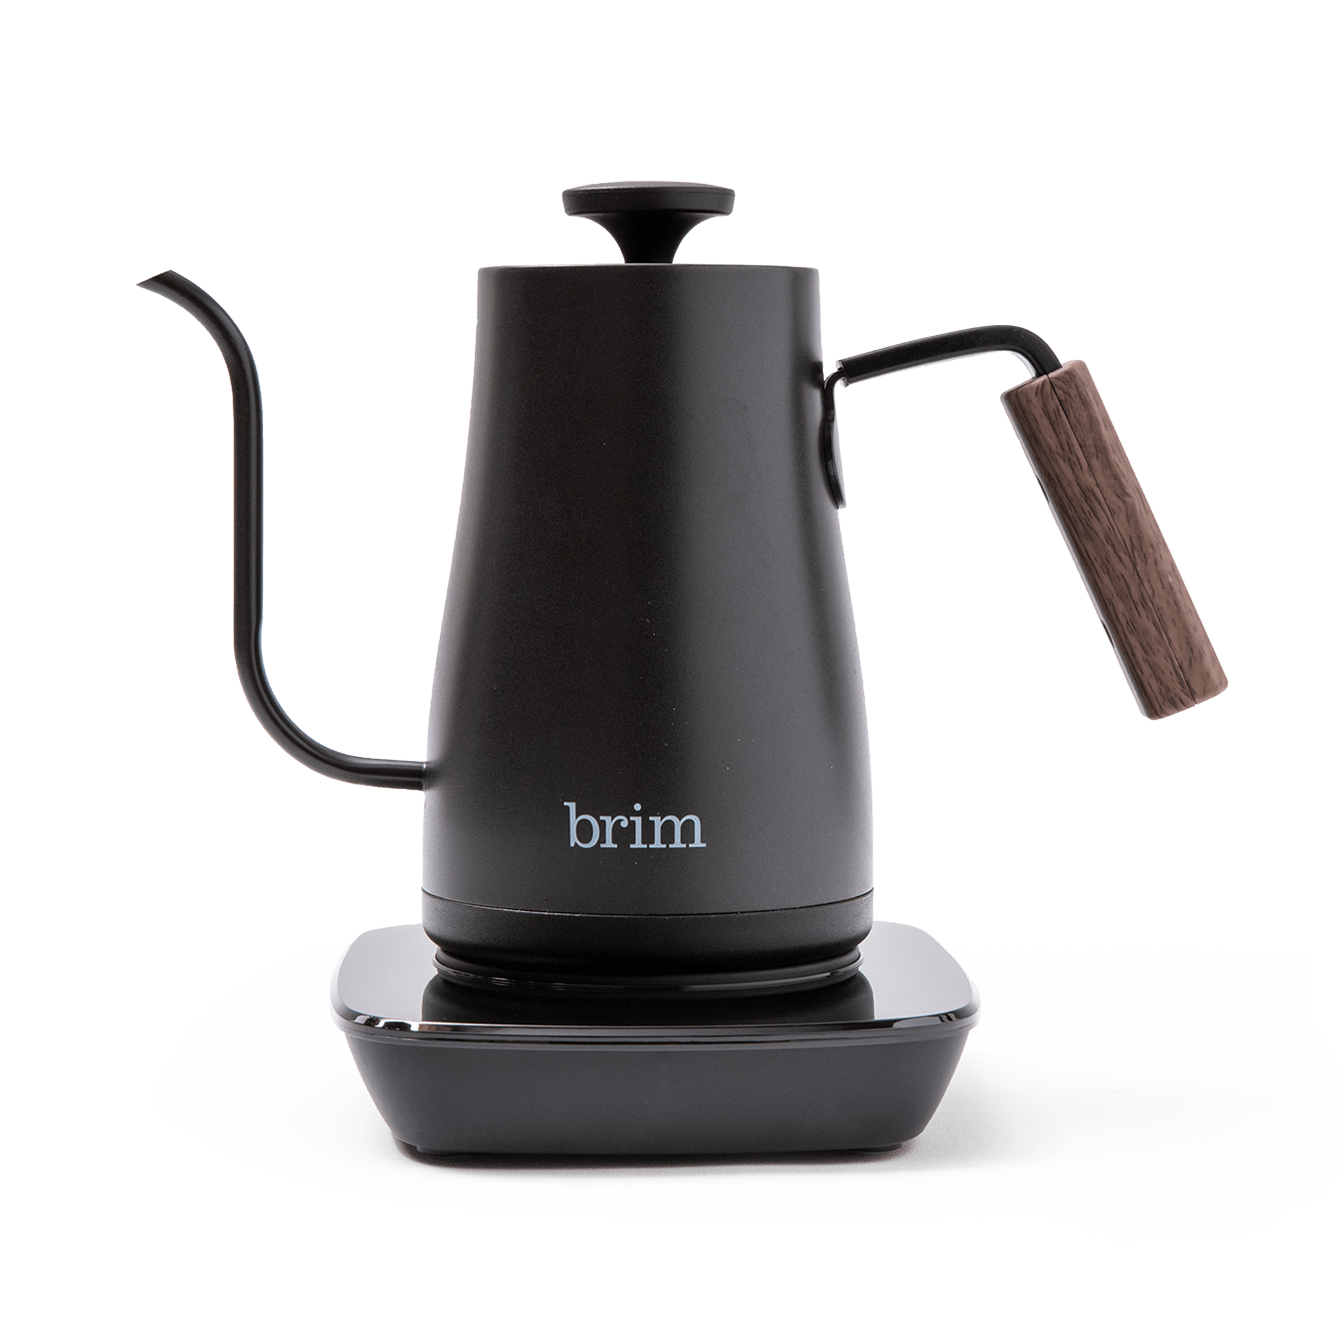 The Best Electric Kettle for Pour-Over Coffee, Tea and More